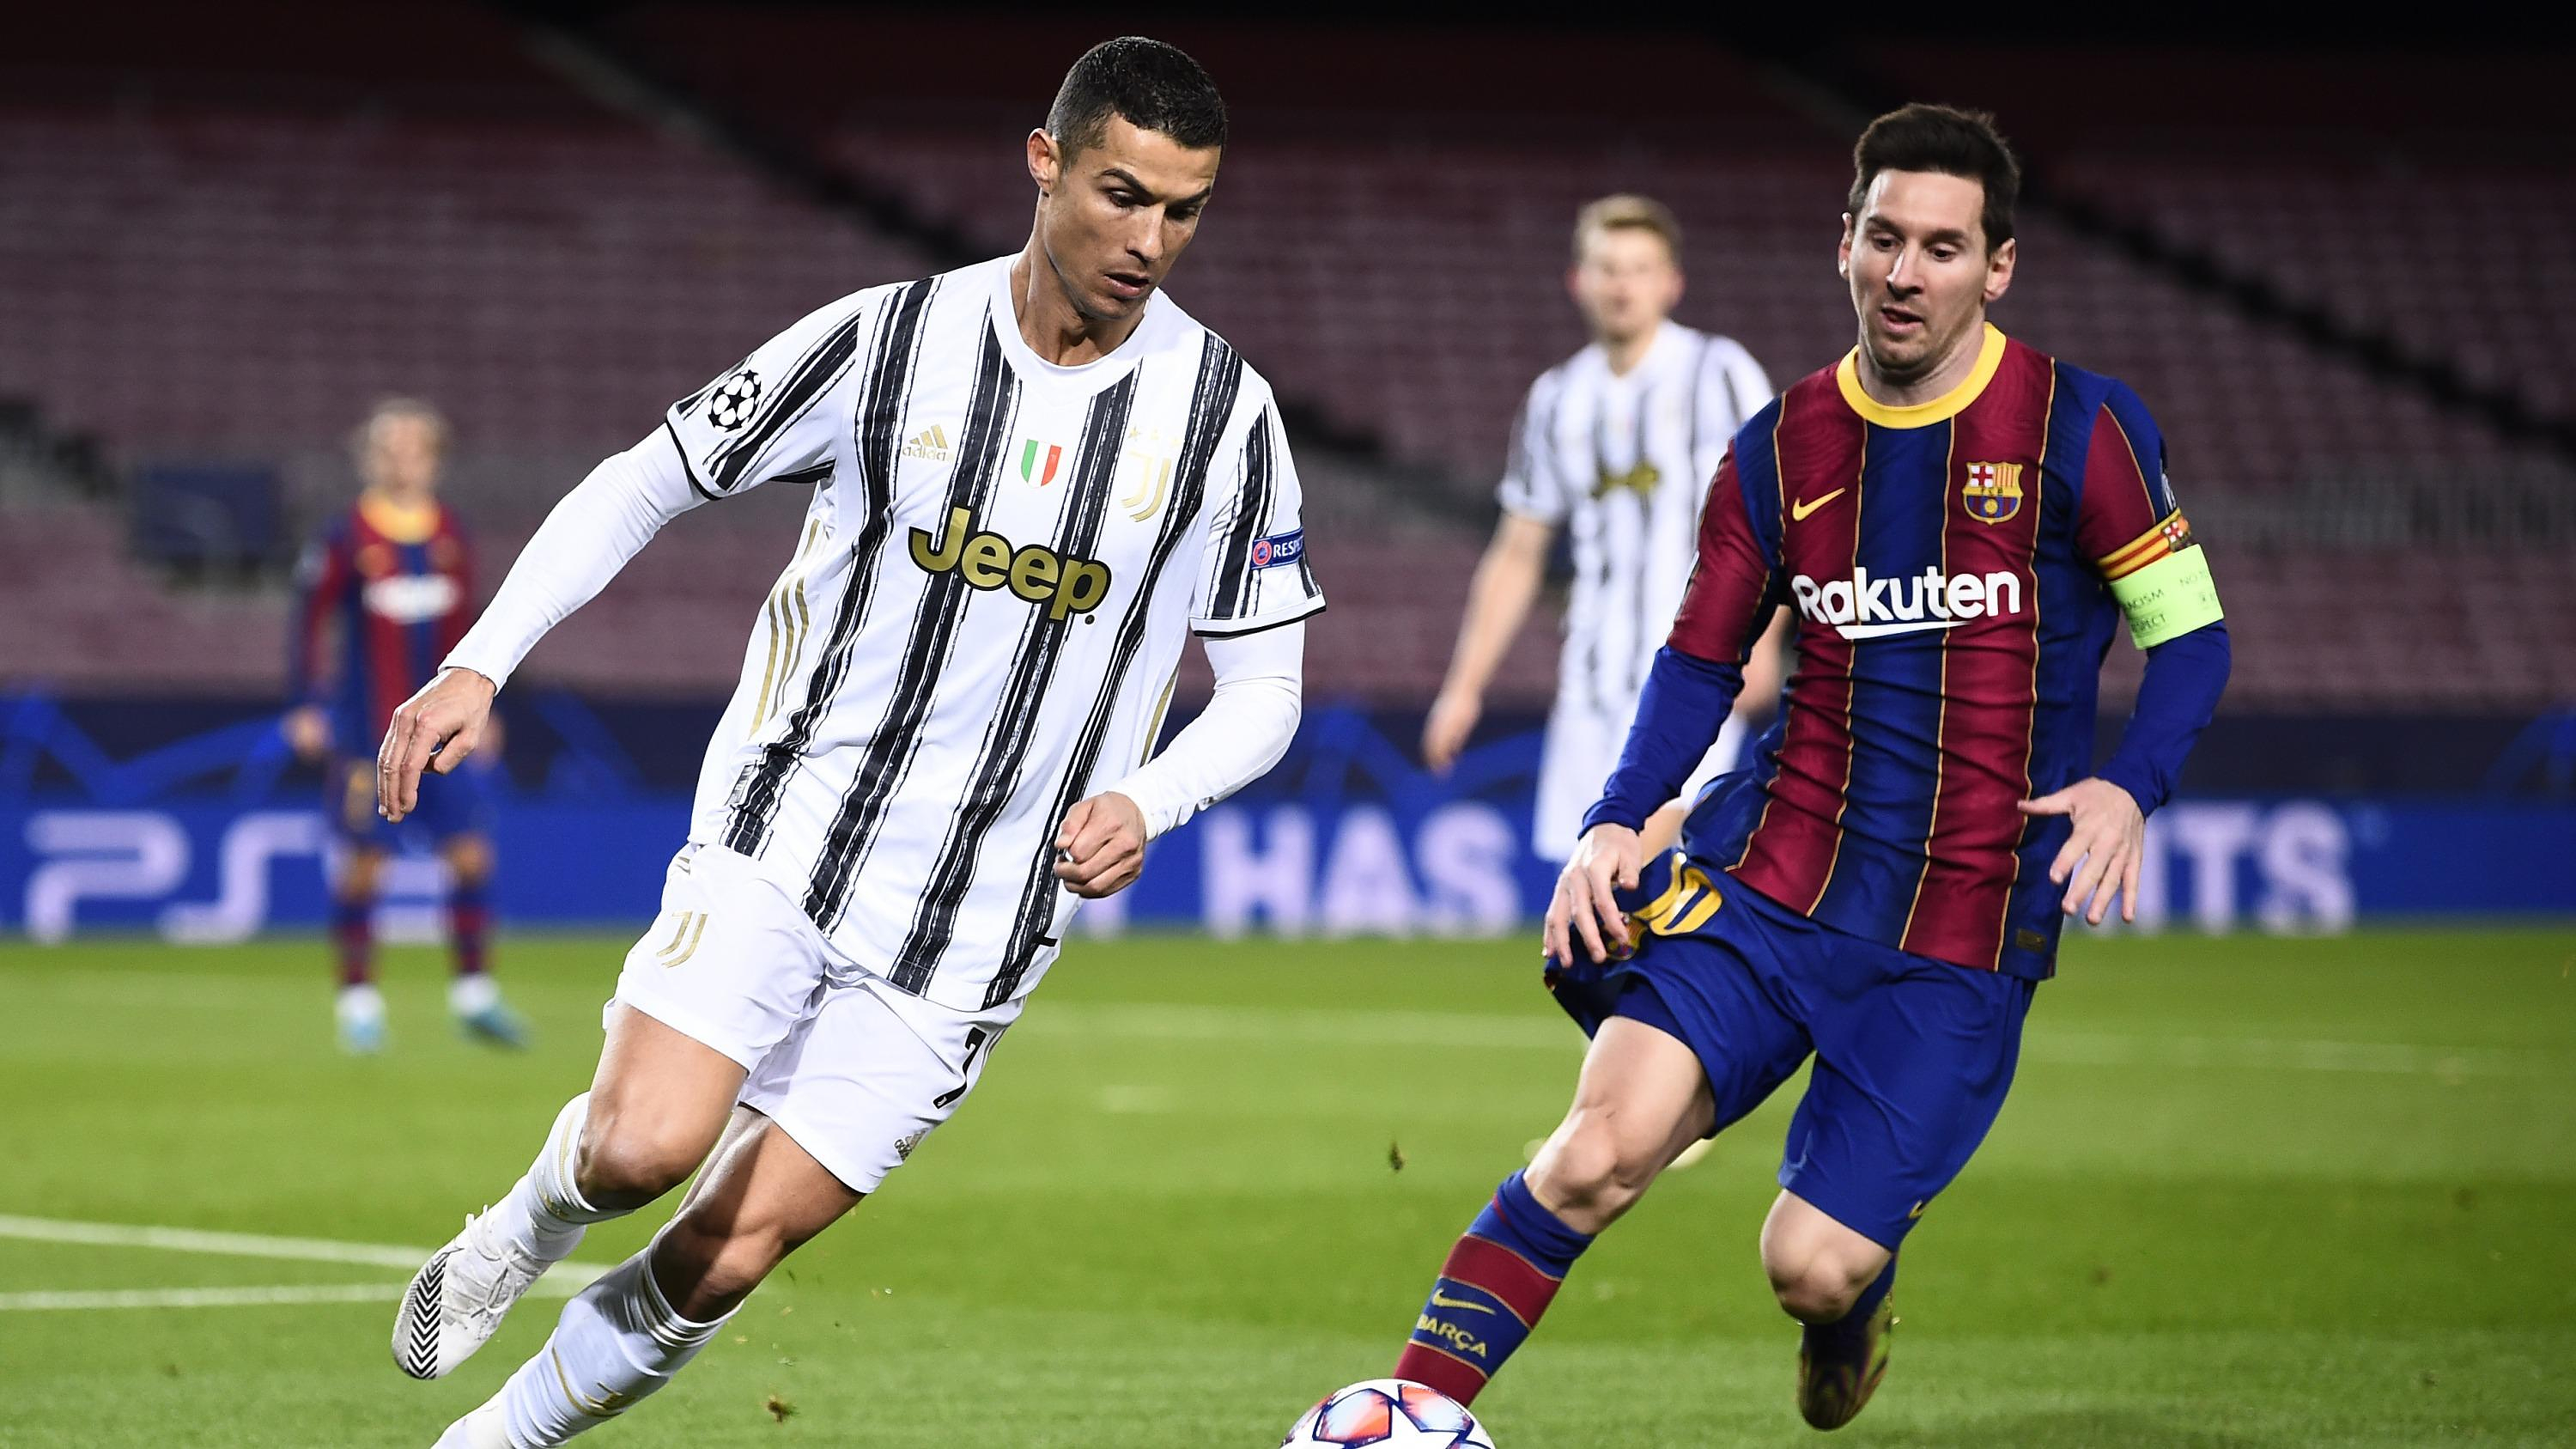 Football: Messi and Ronaldo will meet again in a friendly on February 1